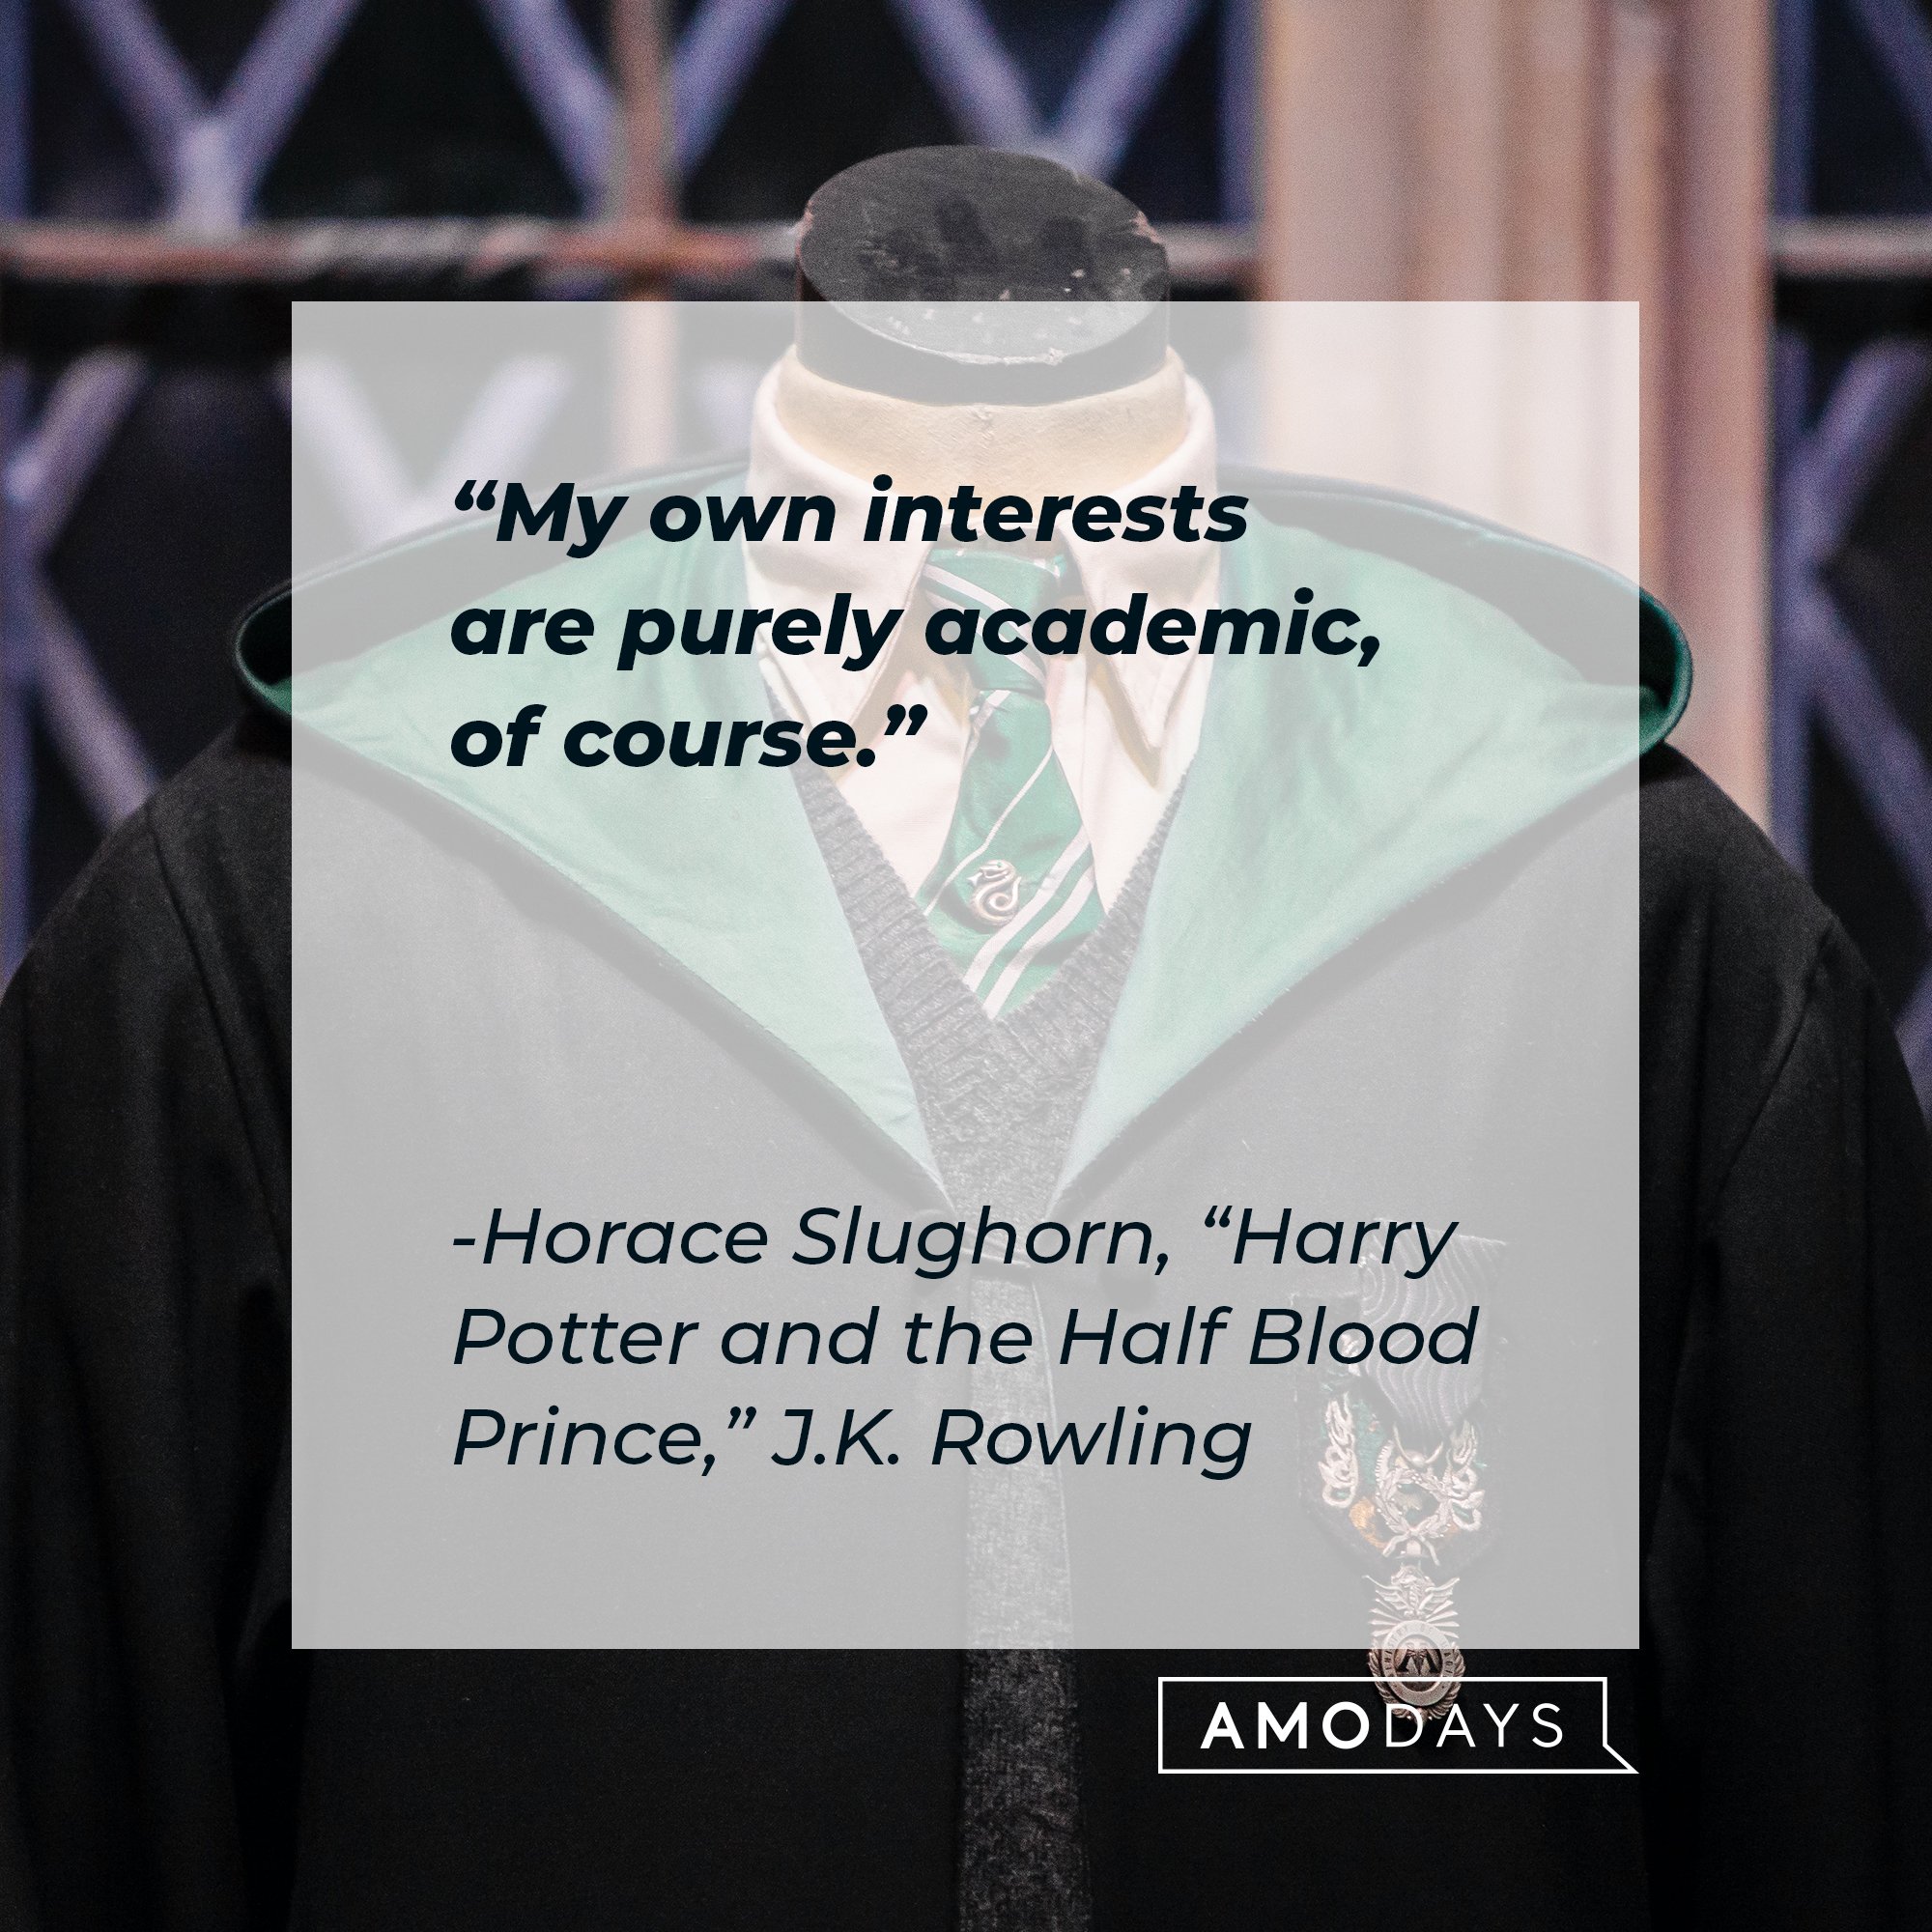 Horace Slughorn’s quote from “Harry Potter and the Half-Blood Prince.” : "My own interests are purely academic of course."| Image: AmoDays